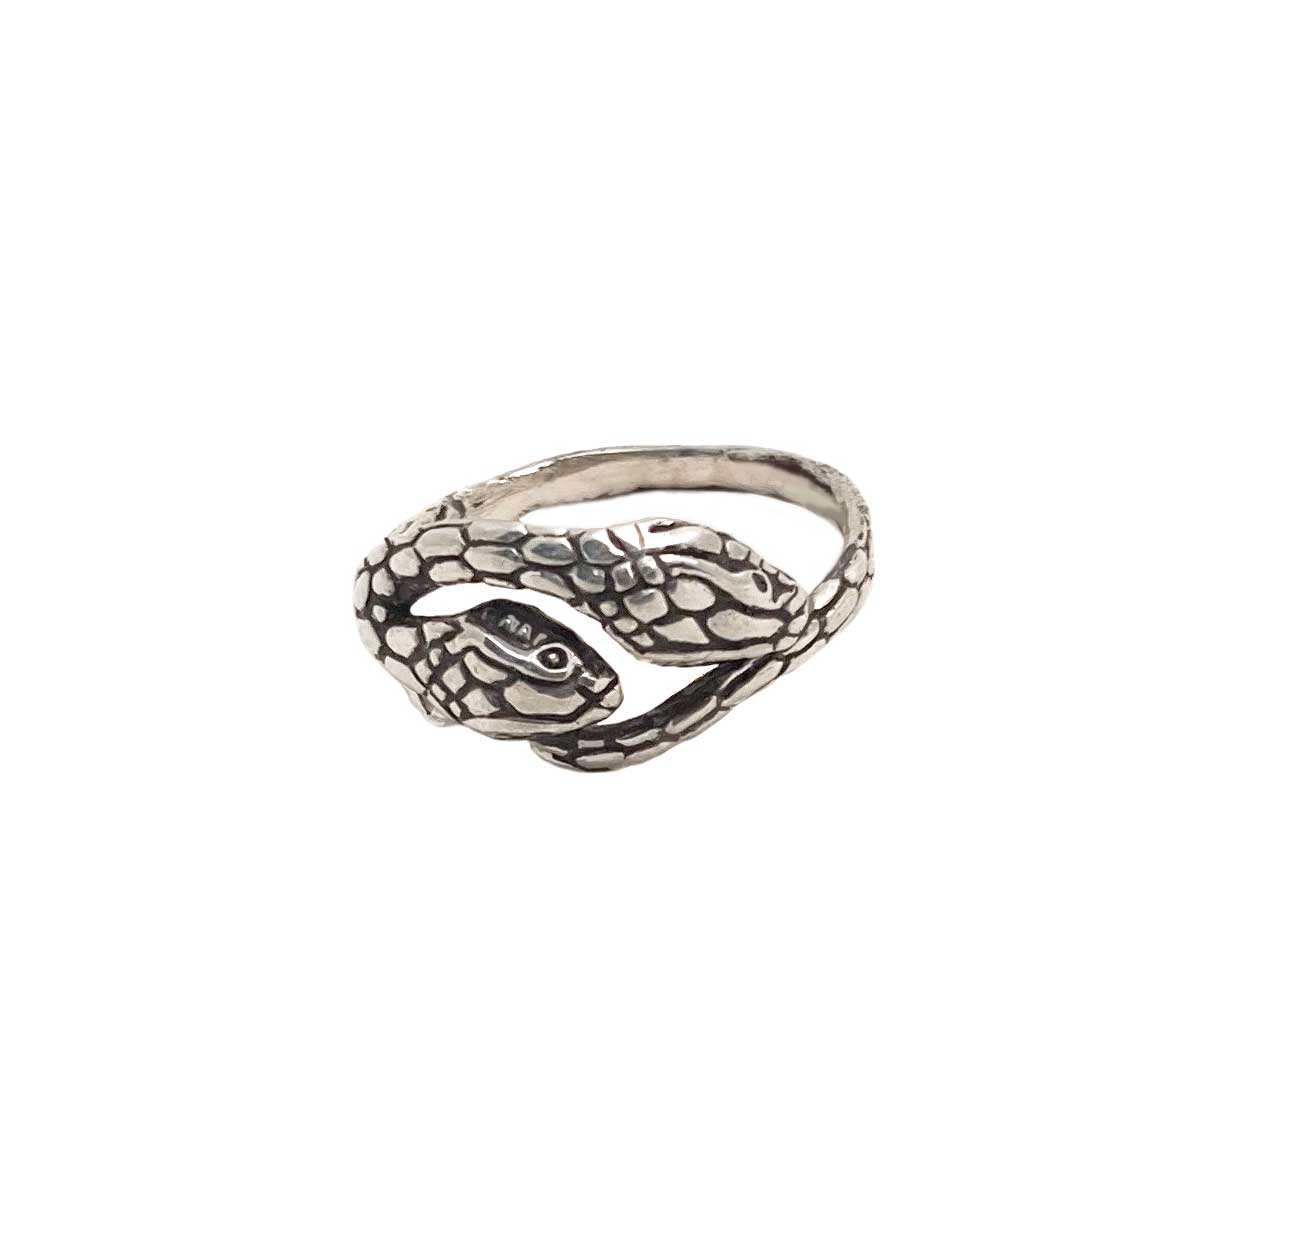 Two Headed Snake Ring – Anomaly